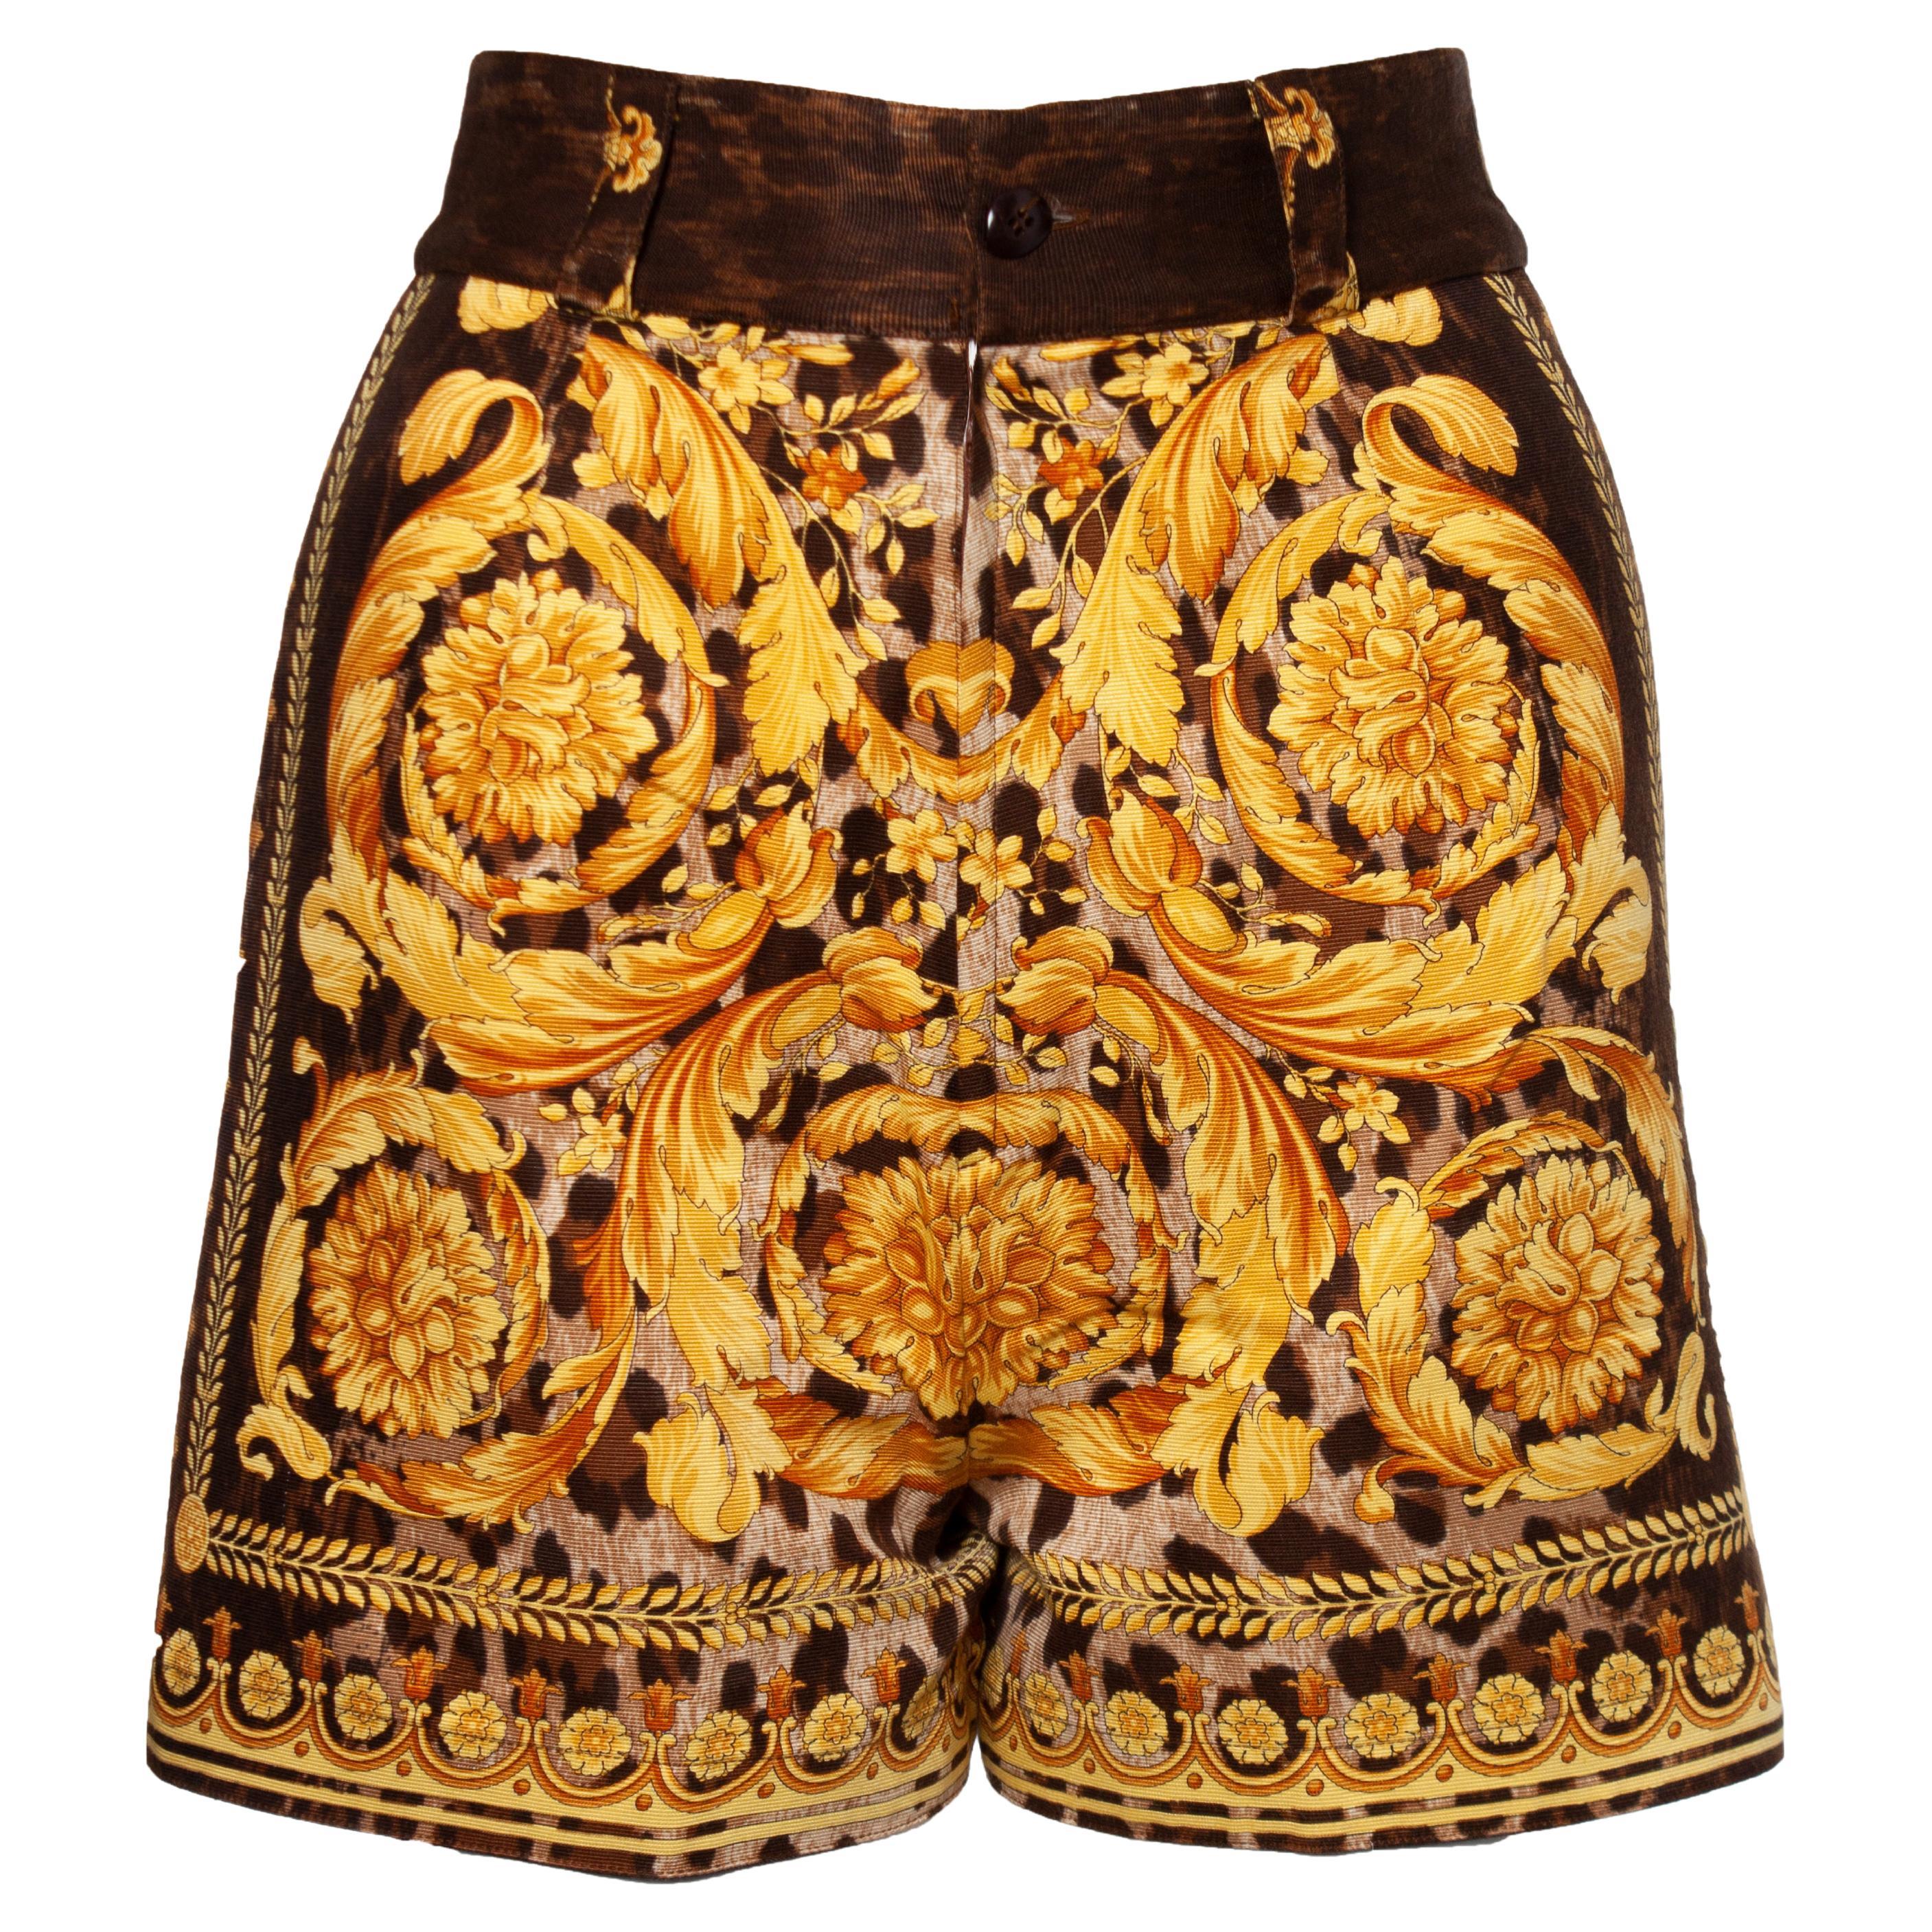 Gianni Versace Couture, Barock-Shorts mit Druck